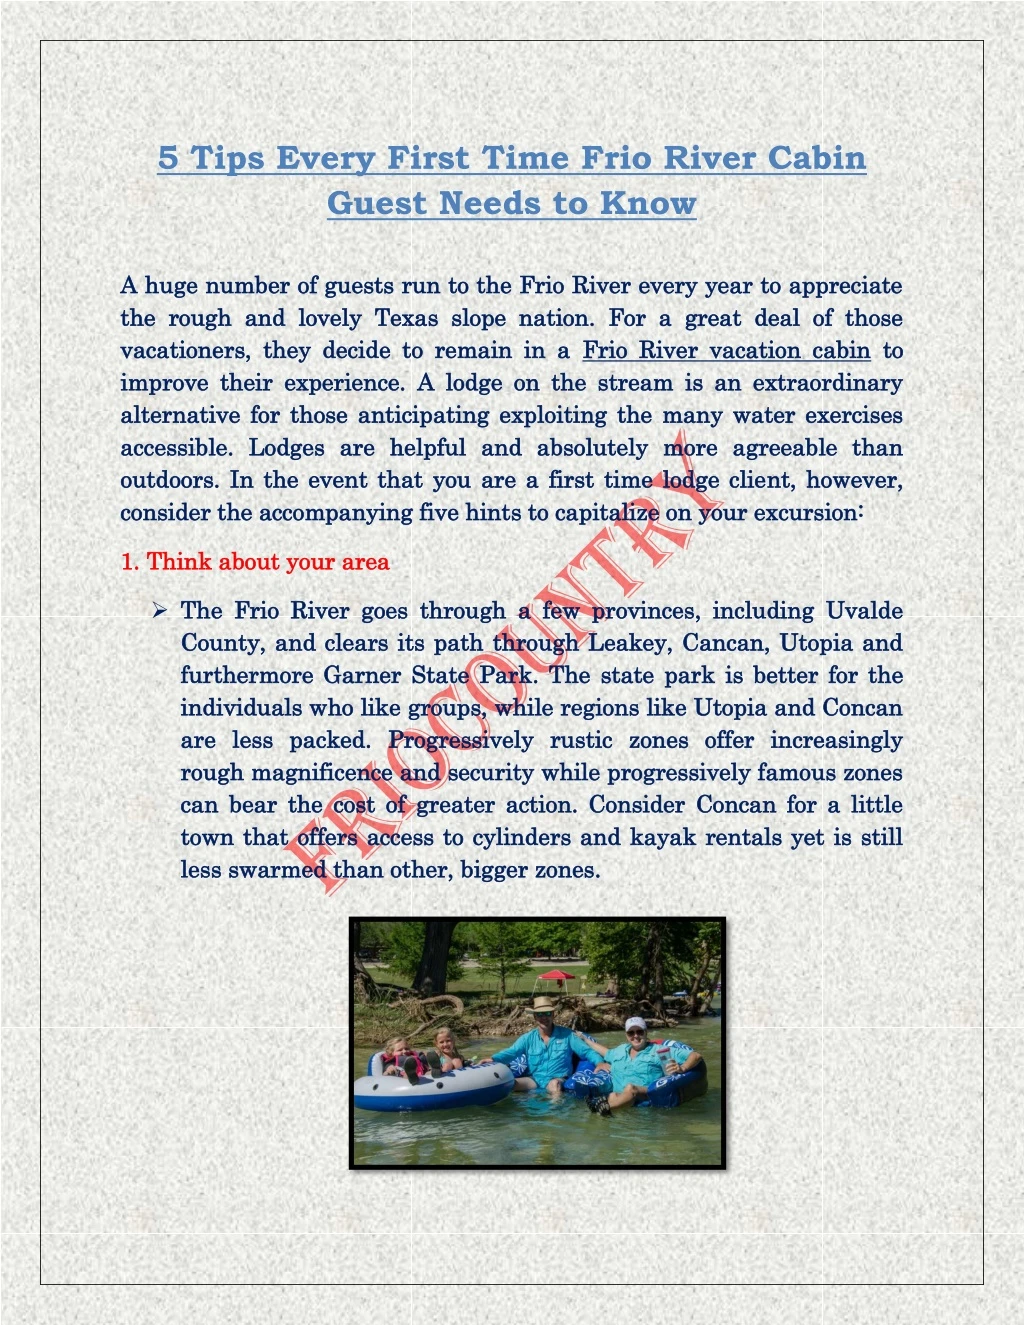 5 tips every first time frio river cabin guest